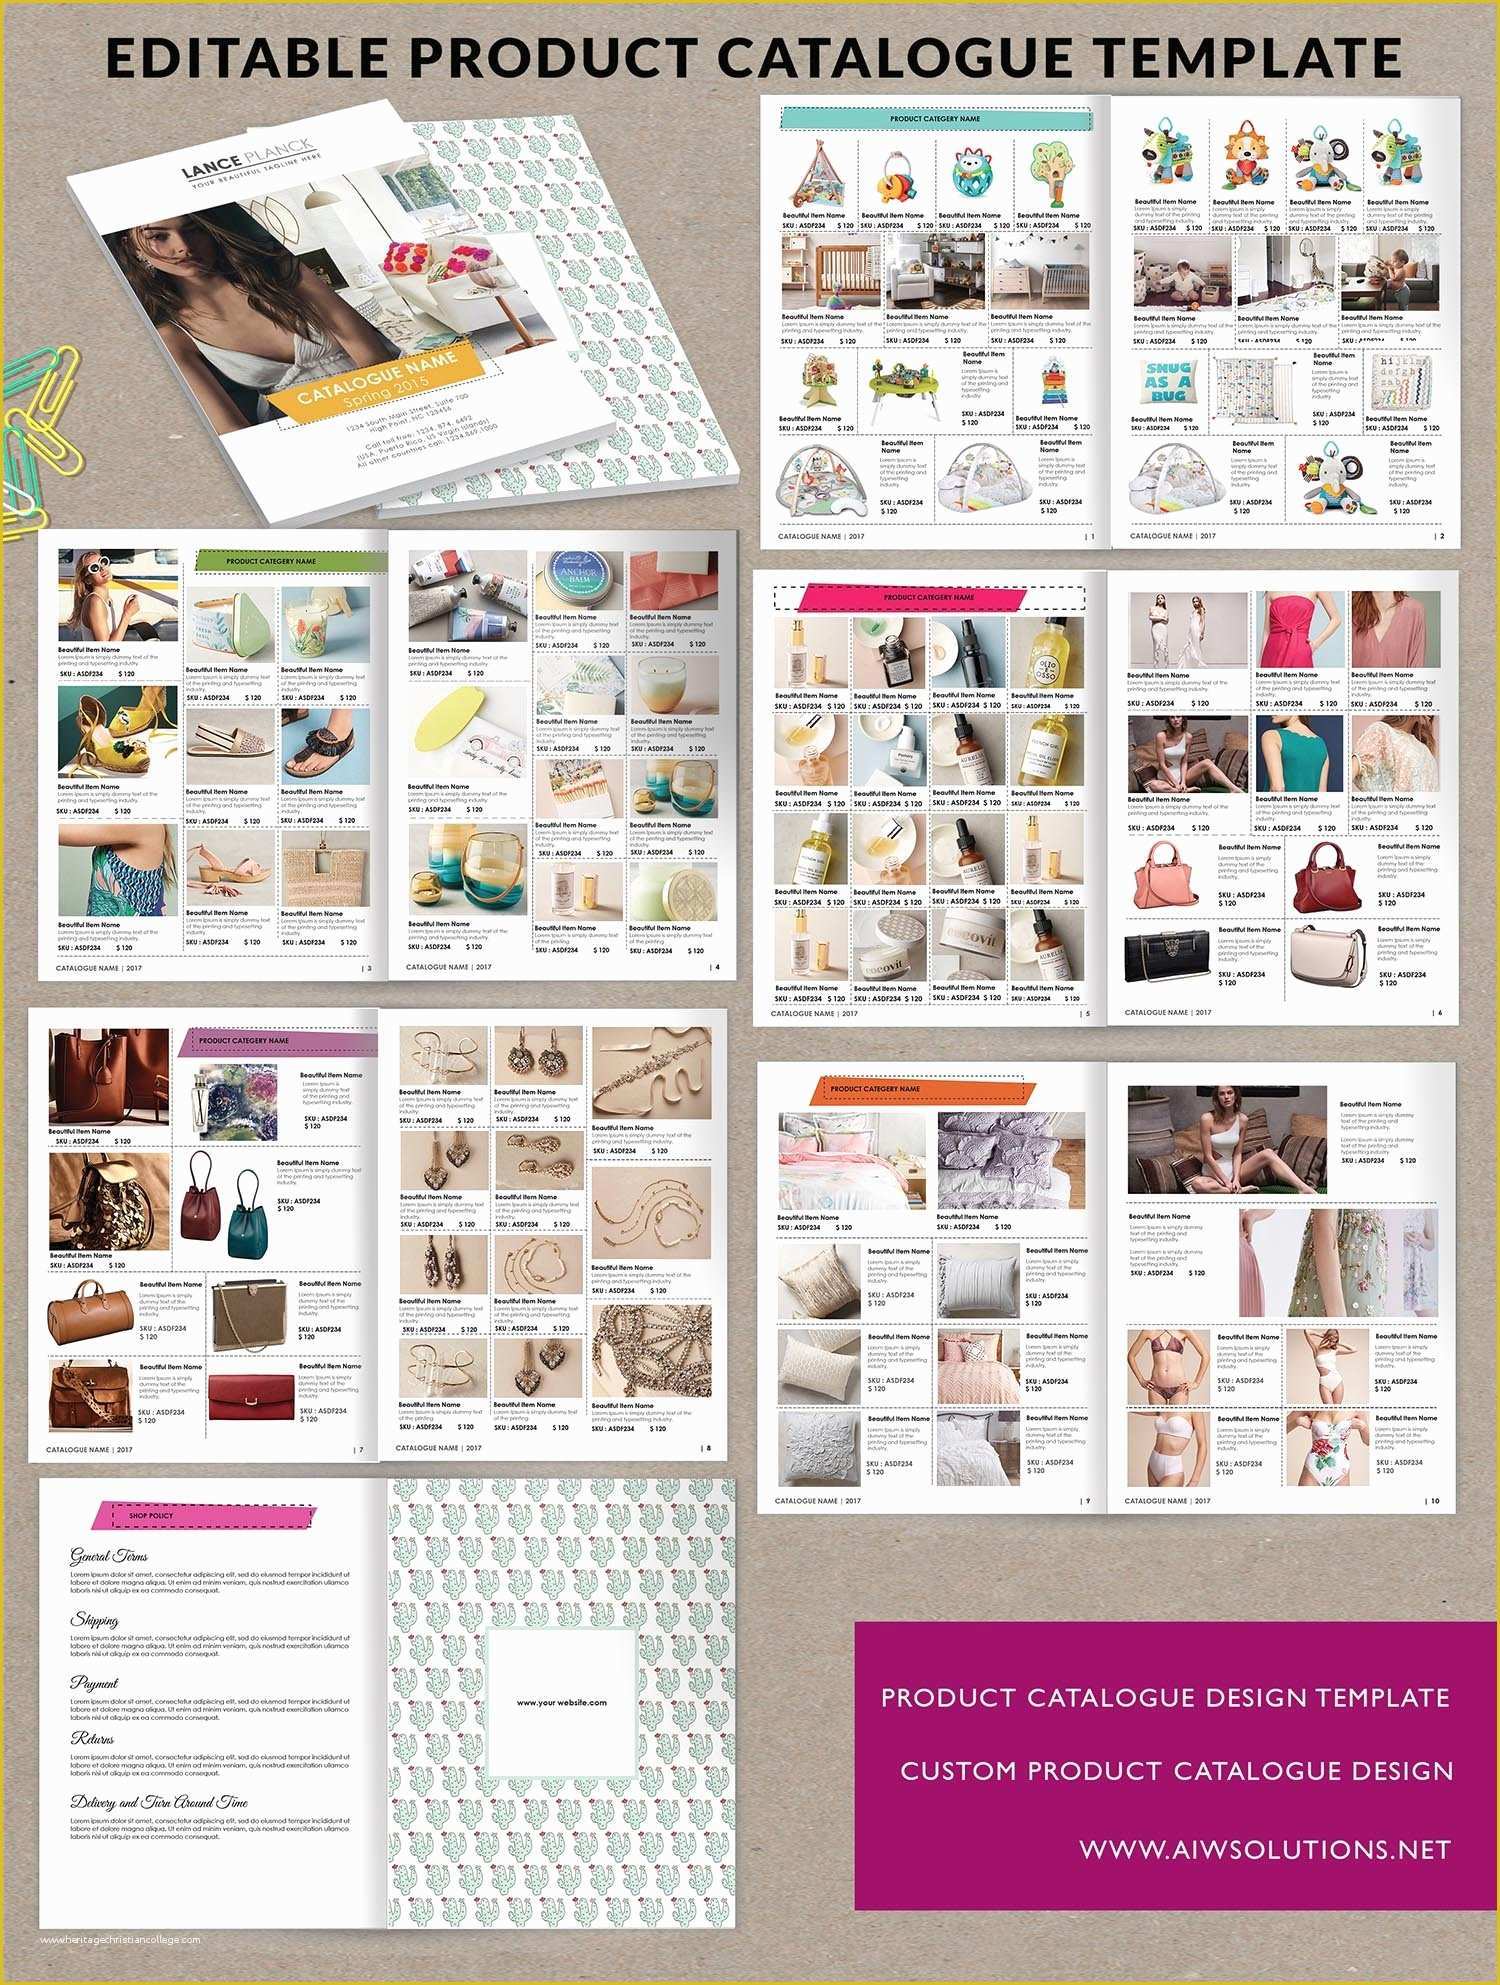 Clothing Catalog Template Free Of Product Brochure Product Catalog Id6 Brochure Templates